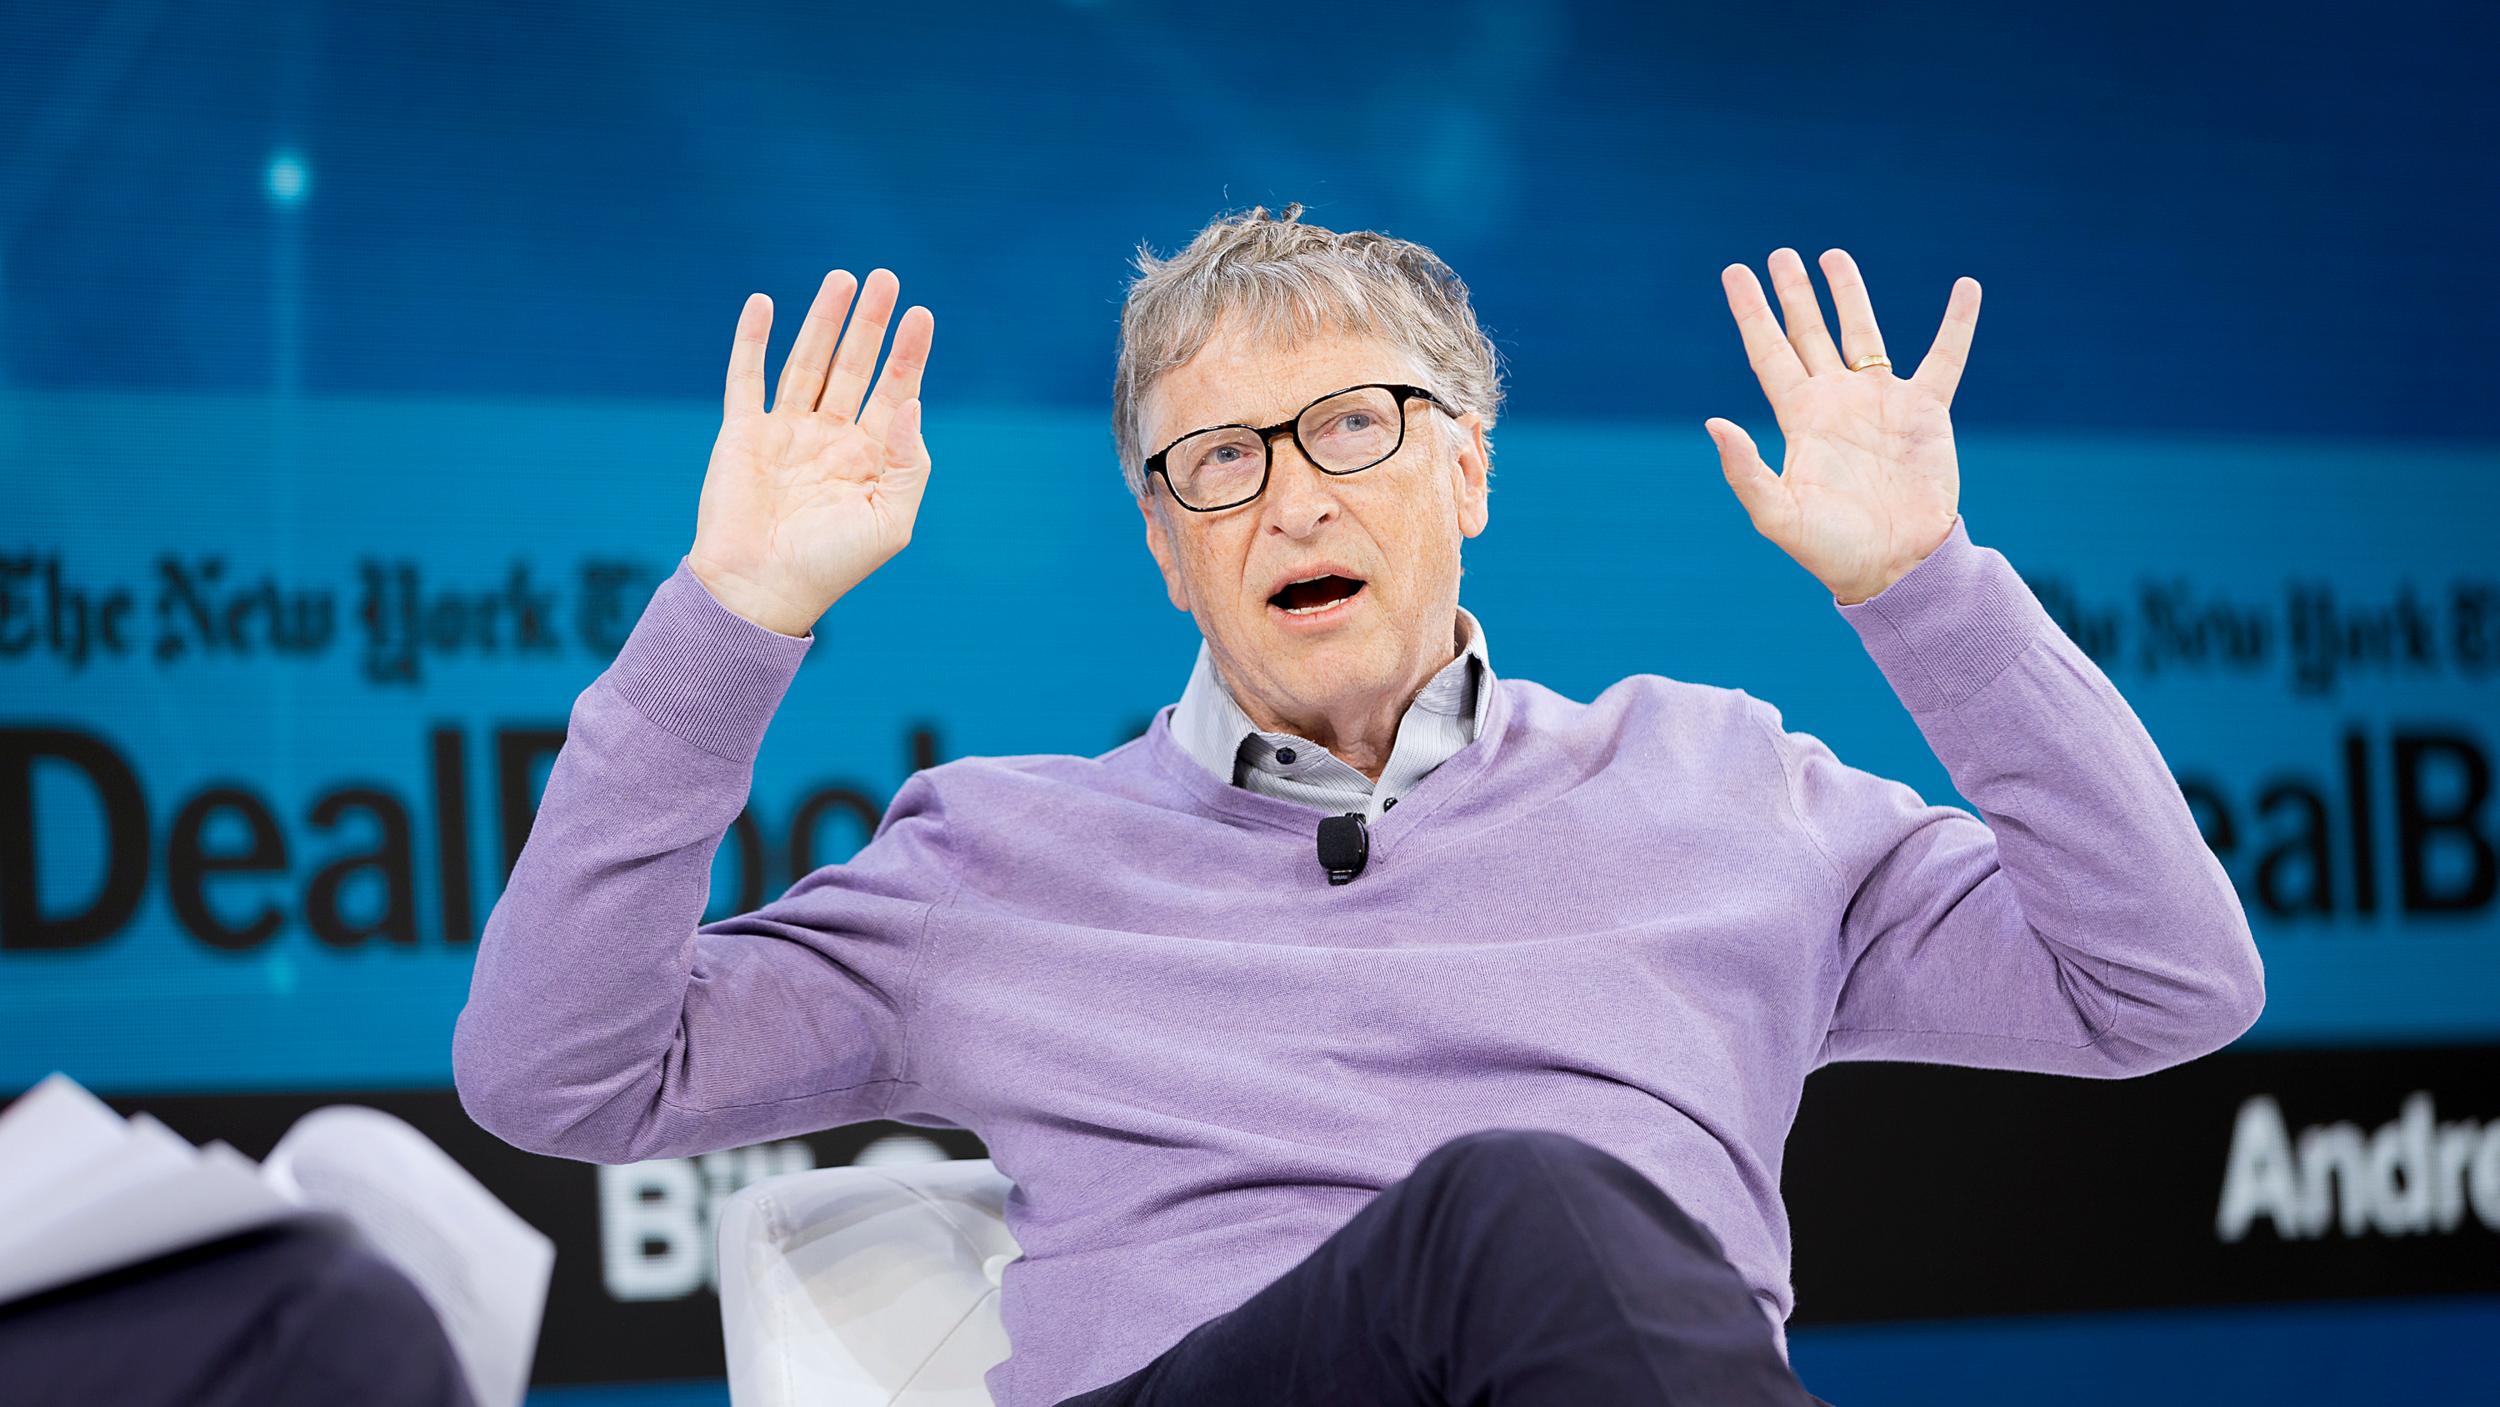 Bill Gates has been warning world leaders about the possibility and threat of a global pandemic for years